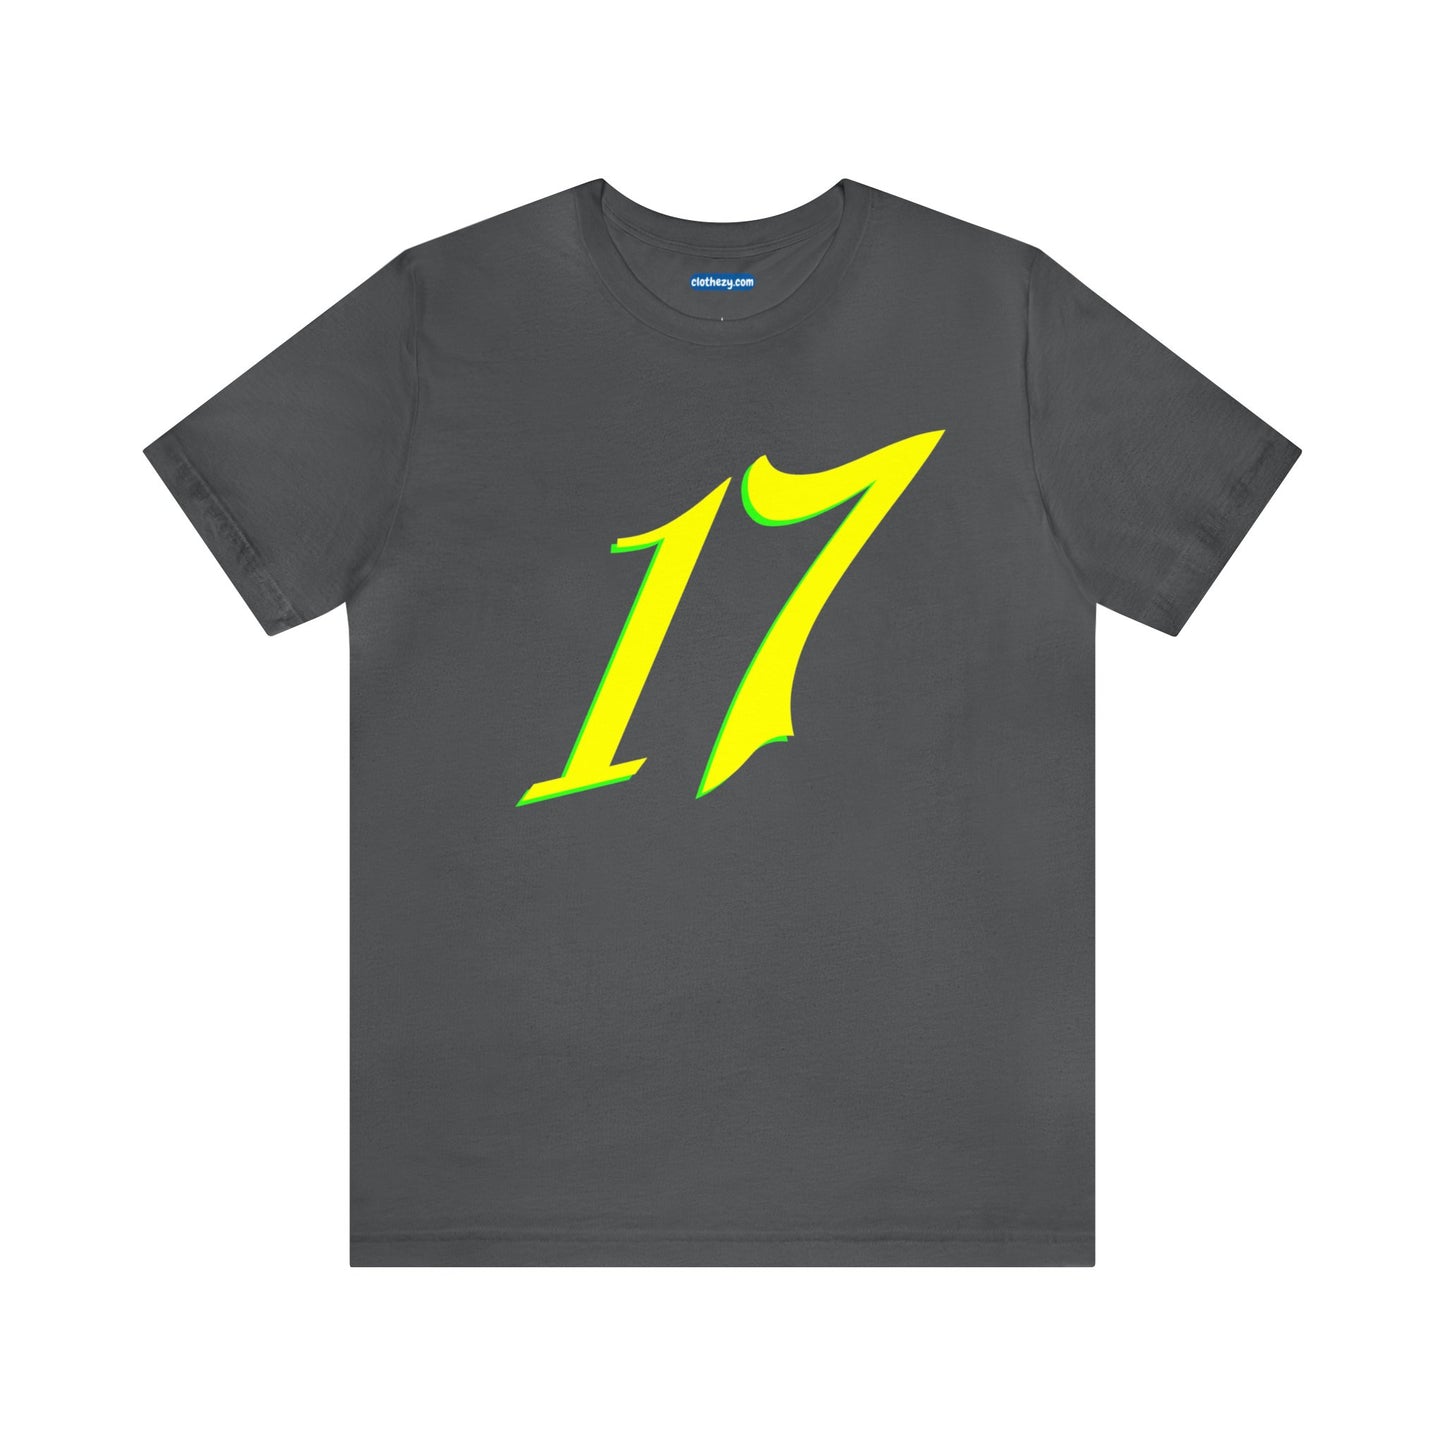 Number 17 Design - Soft Cotton Tee for birthdays and celebrations, Gift for friends and family, Multiple Options by clothezy.com in Black Size Small - Buy Now